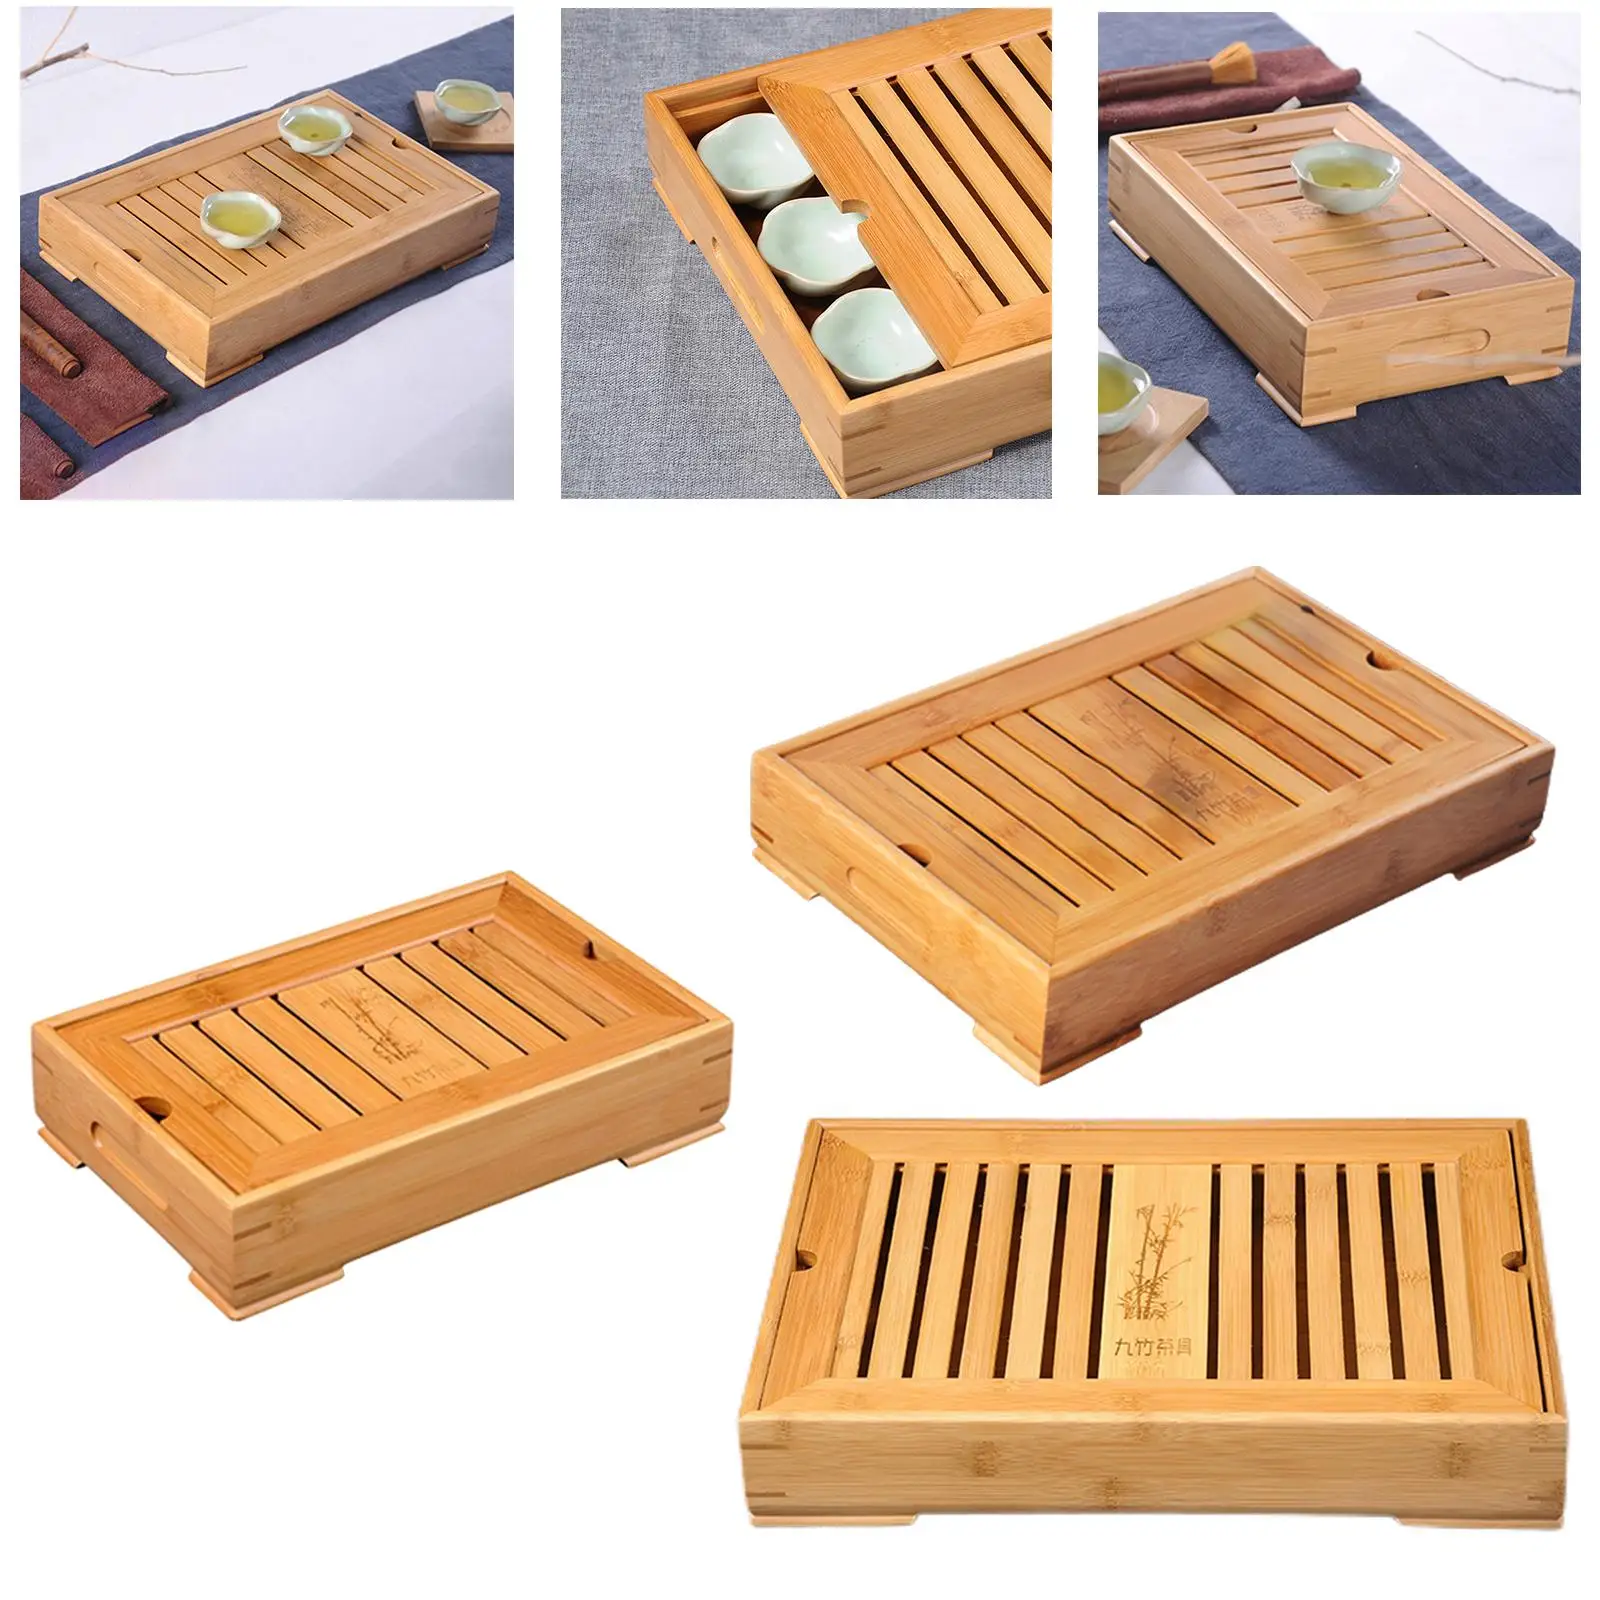 Bamboo Chinese Gongfu Tea Tray Serving Platter Hollow Design Storage for Novelty Gifts